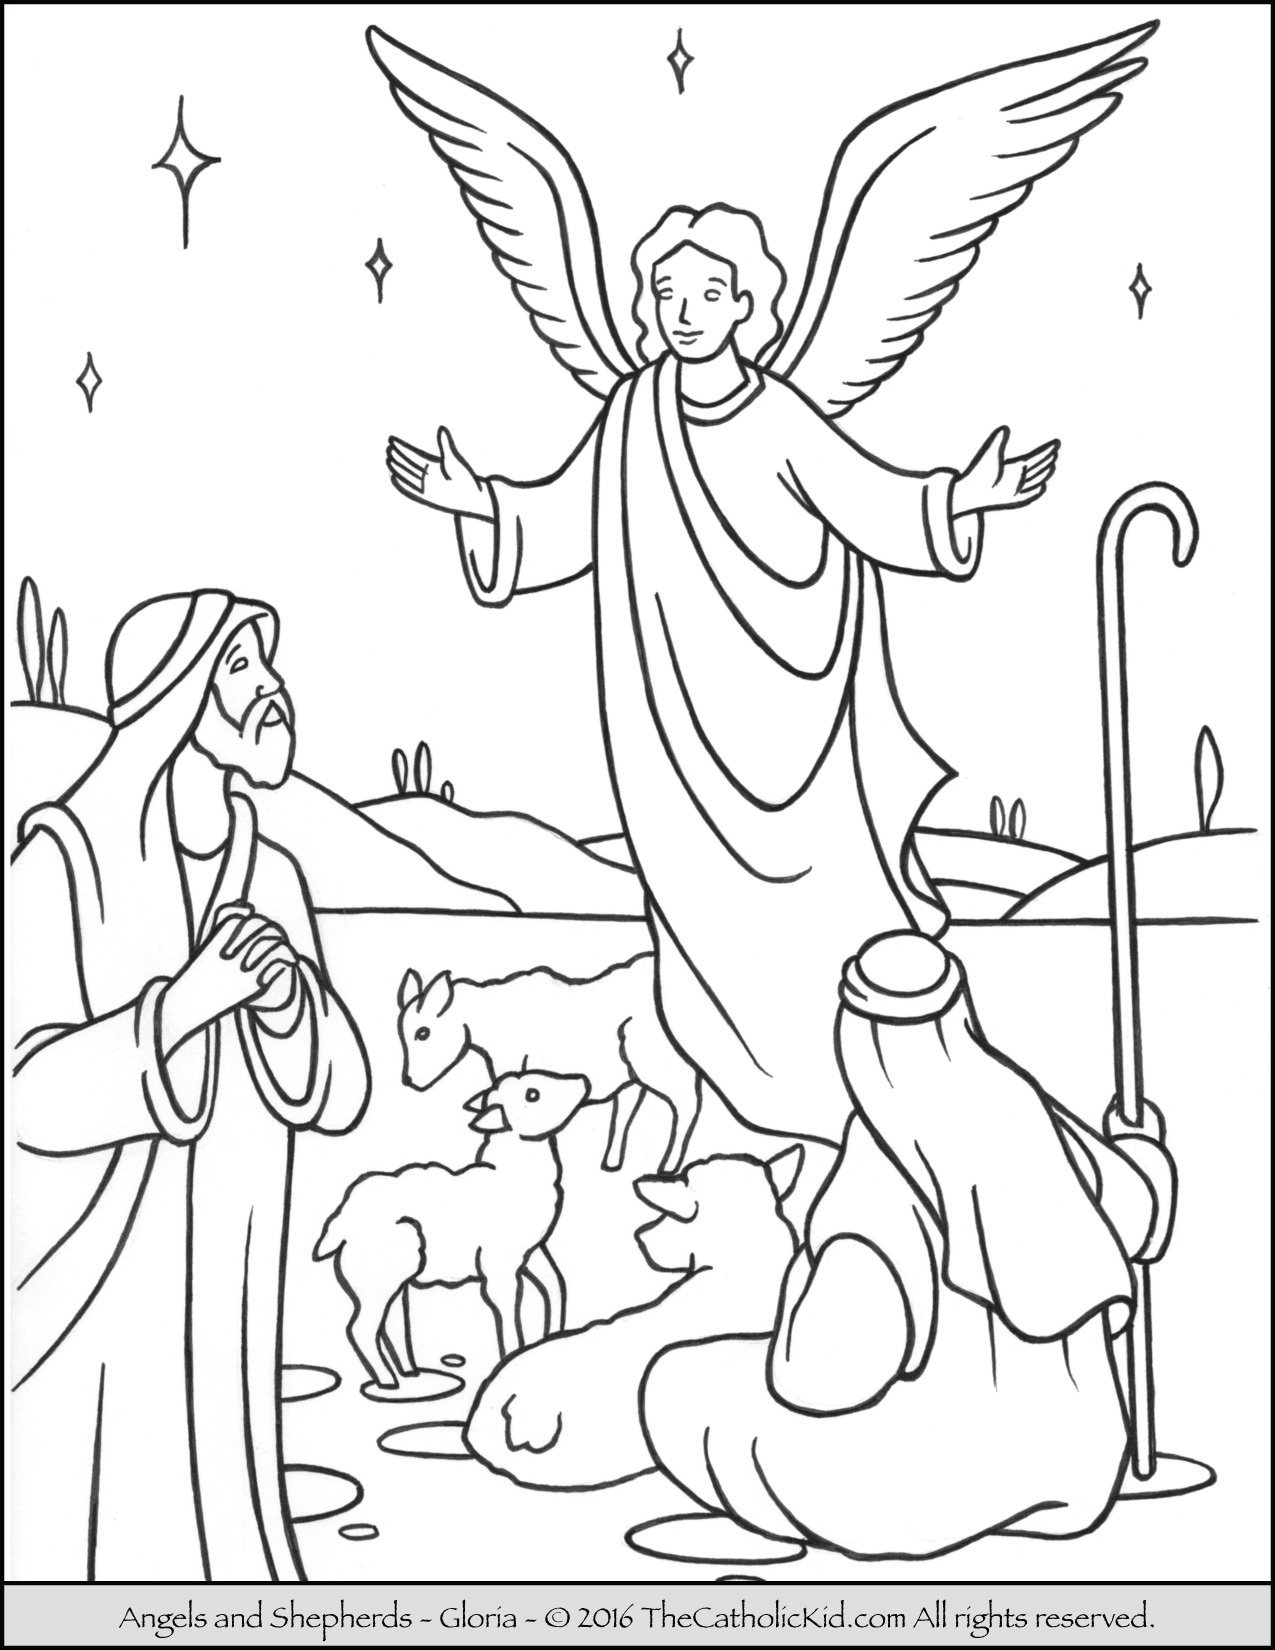 Angels Shepherds Gloria Coloring Page - TheCahtolicKid